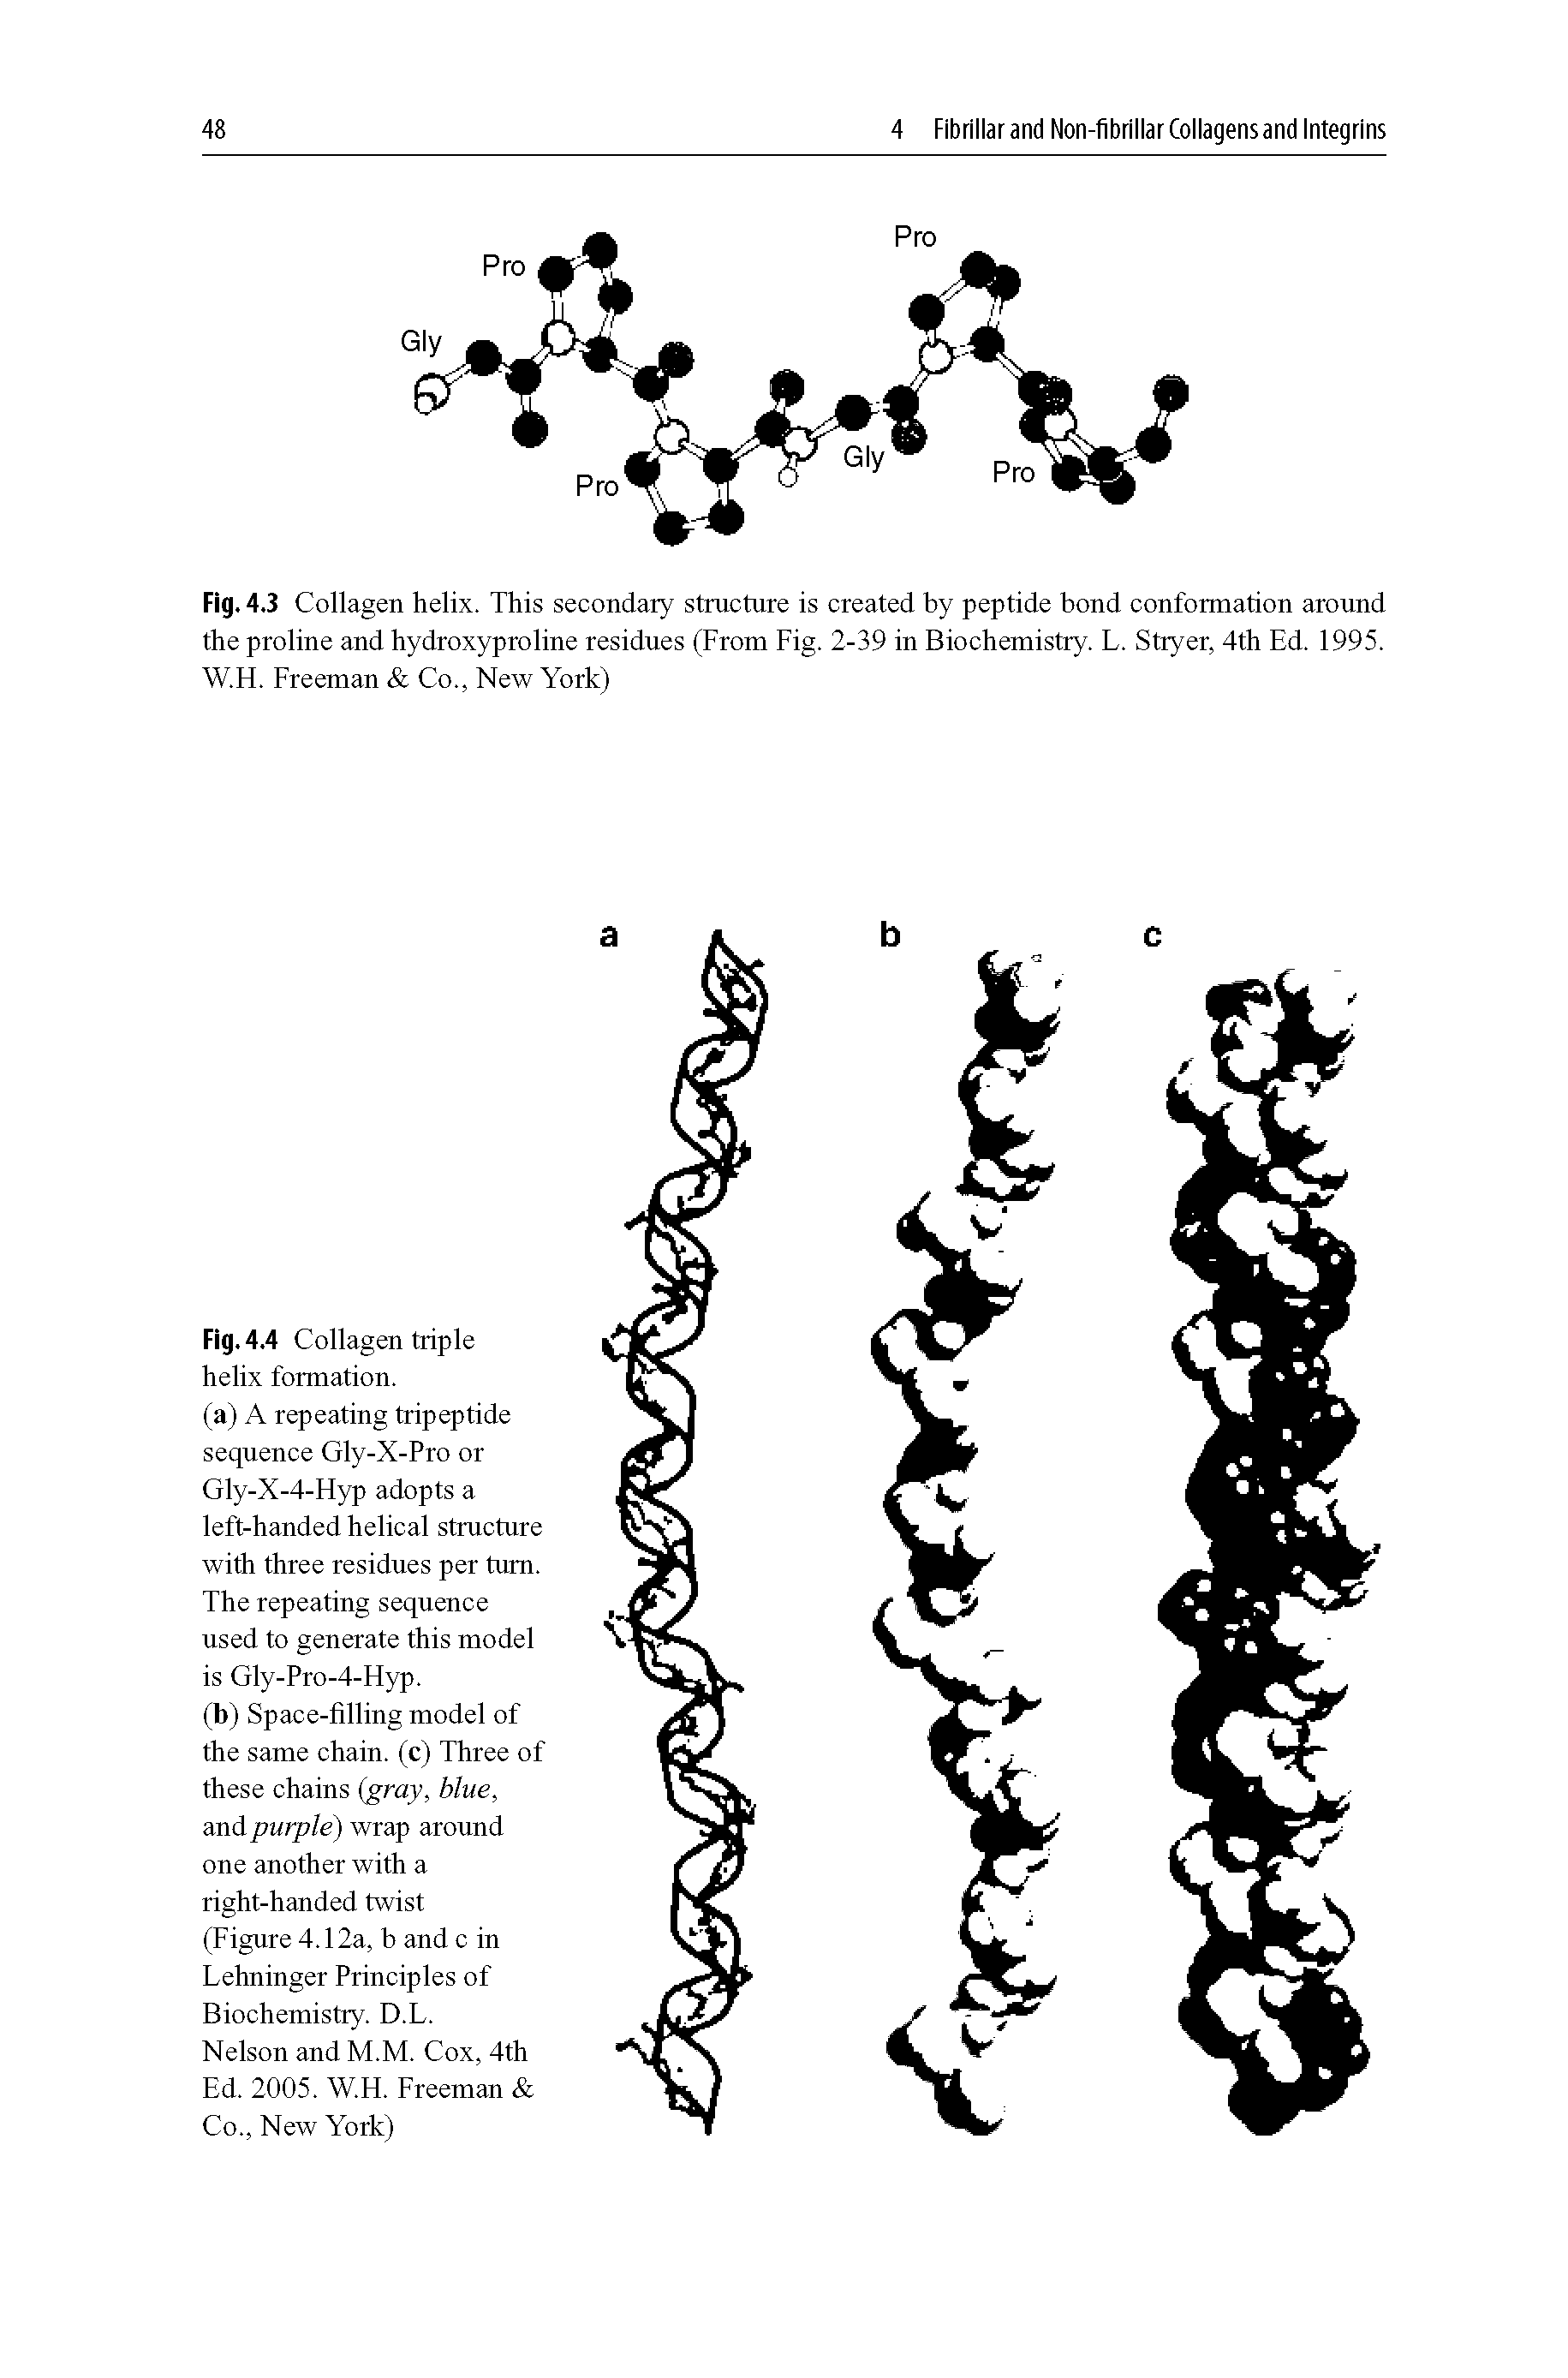 Fig. 4.3 Collagen helix. This secondary structure is created by peptide bond conformation around the proline and hydroxyproline residues (From Fig. 2-39 in Biochemistry. L. Stryer, 4th Ed. 1995. W.H. Freeman Co., New York)...